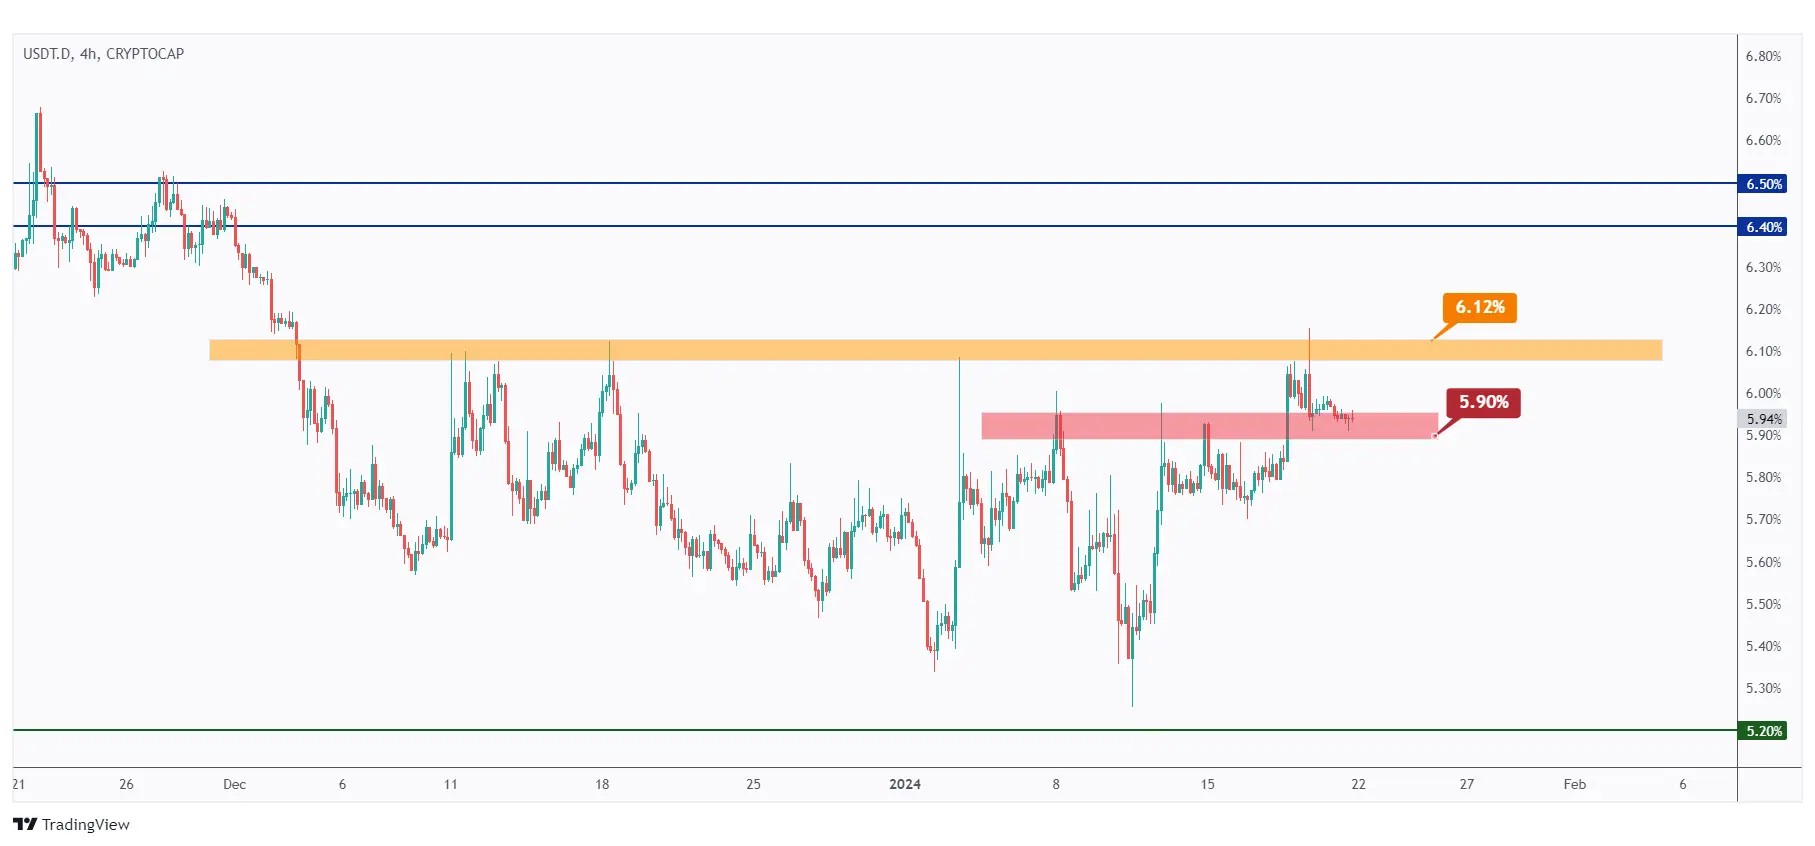 usdt dominance 4h chart trading inside a narrow range between 5.9% local support and 6.12% local resistance.